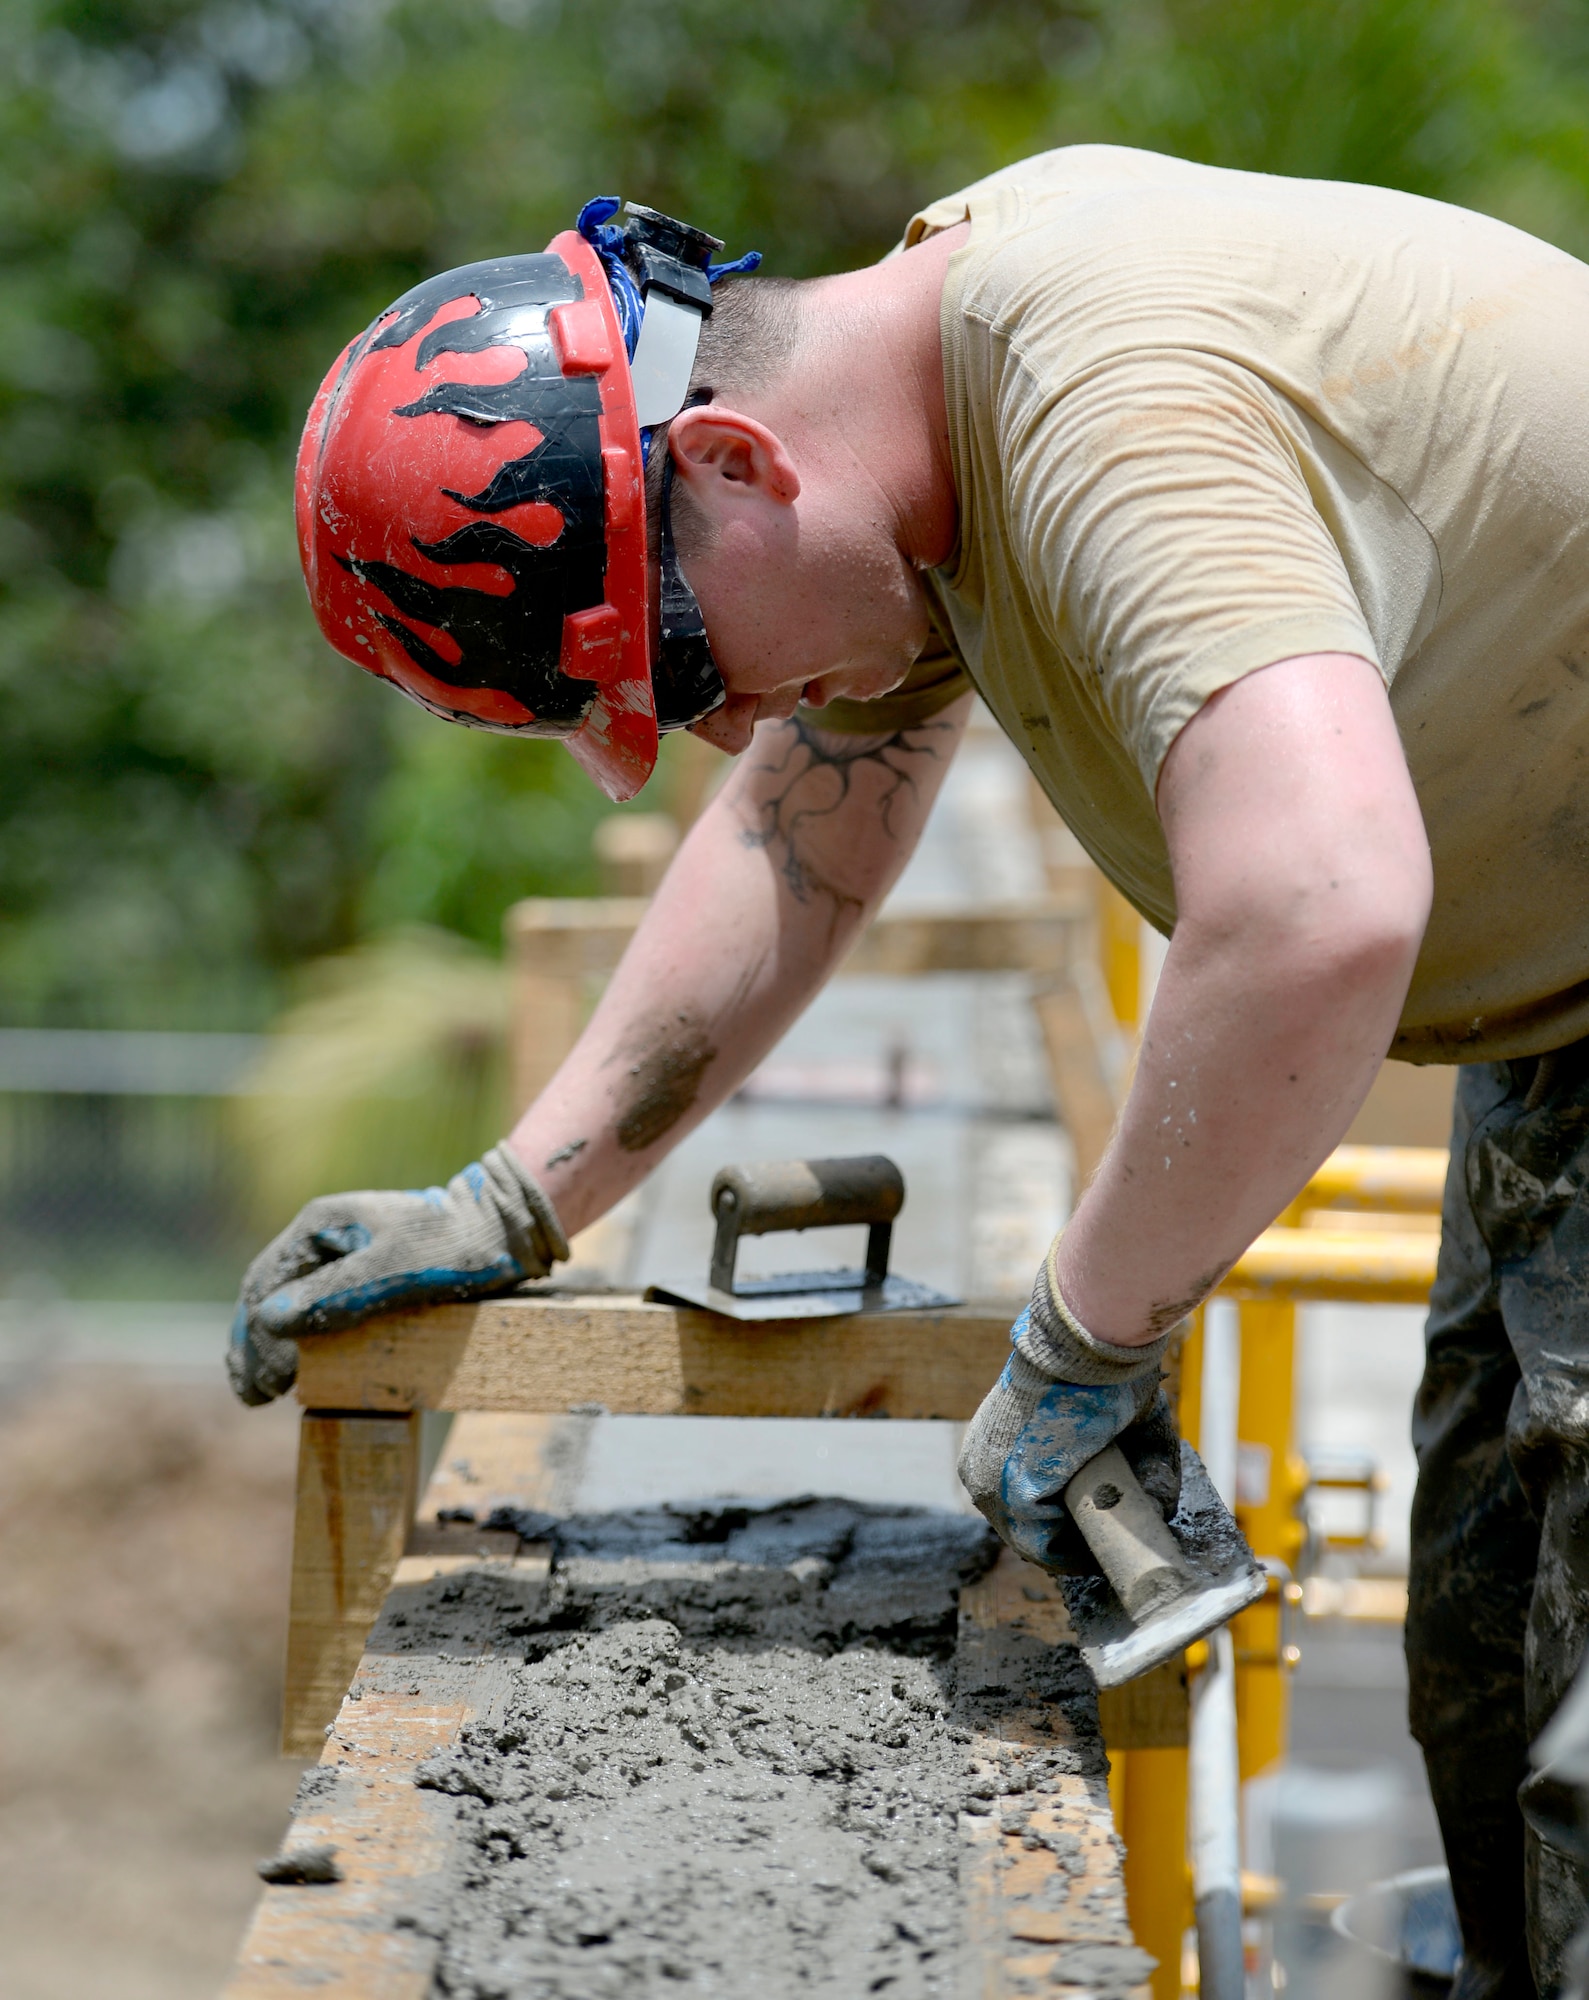 U.S. Air Force Senior Airman Dylan Troiani, 823rd Expeditionary RED HORSE Squadron structural journeyman, out of Hurlburt Field, Fla., works to smooth out the cement used to create the bond beam at the top of new two-room school building at the Gabriela Mistral primary school construction site in Ocotes Alto, Honduras, June 22, 2015. The construction project is part of the NEW HORIZONS Honduras 2015 training exercise, an annual humanitarian exercise put on by U.S. Southern Command. NEW HORIZONS was launched in the 1980s and is an annual joint humanitarian assistance exercise that U.S. Southern Command conducts with a partner nation in Central America, South America or the Caribbean. The exercise improves joint training readiness of U.S. and partner nation civil engineers, medical professionals and support personnel through humanitarian assistance activities. (U.S. Air Force photo by Capt. David J. Murphy/Released)